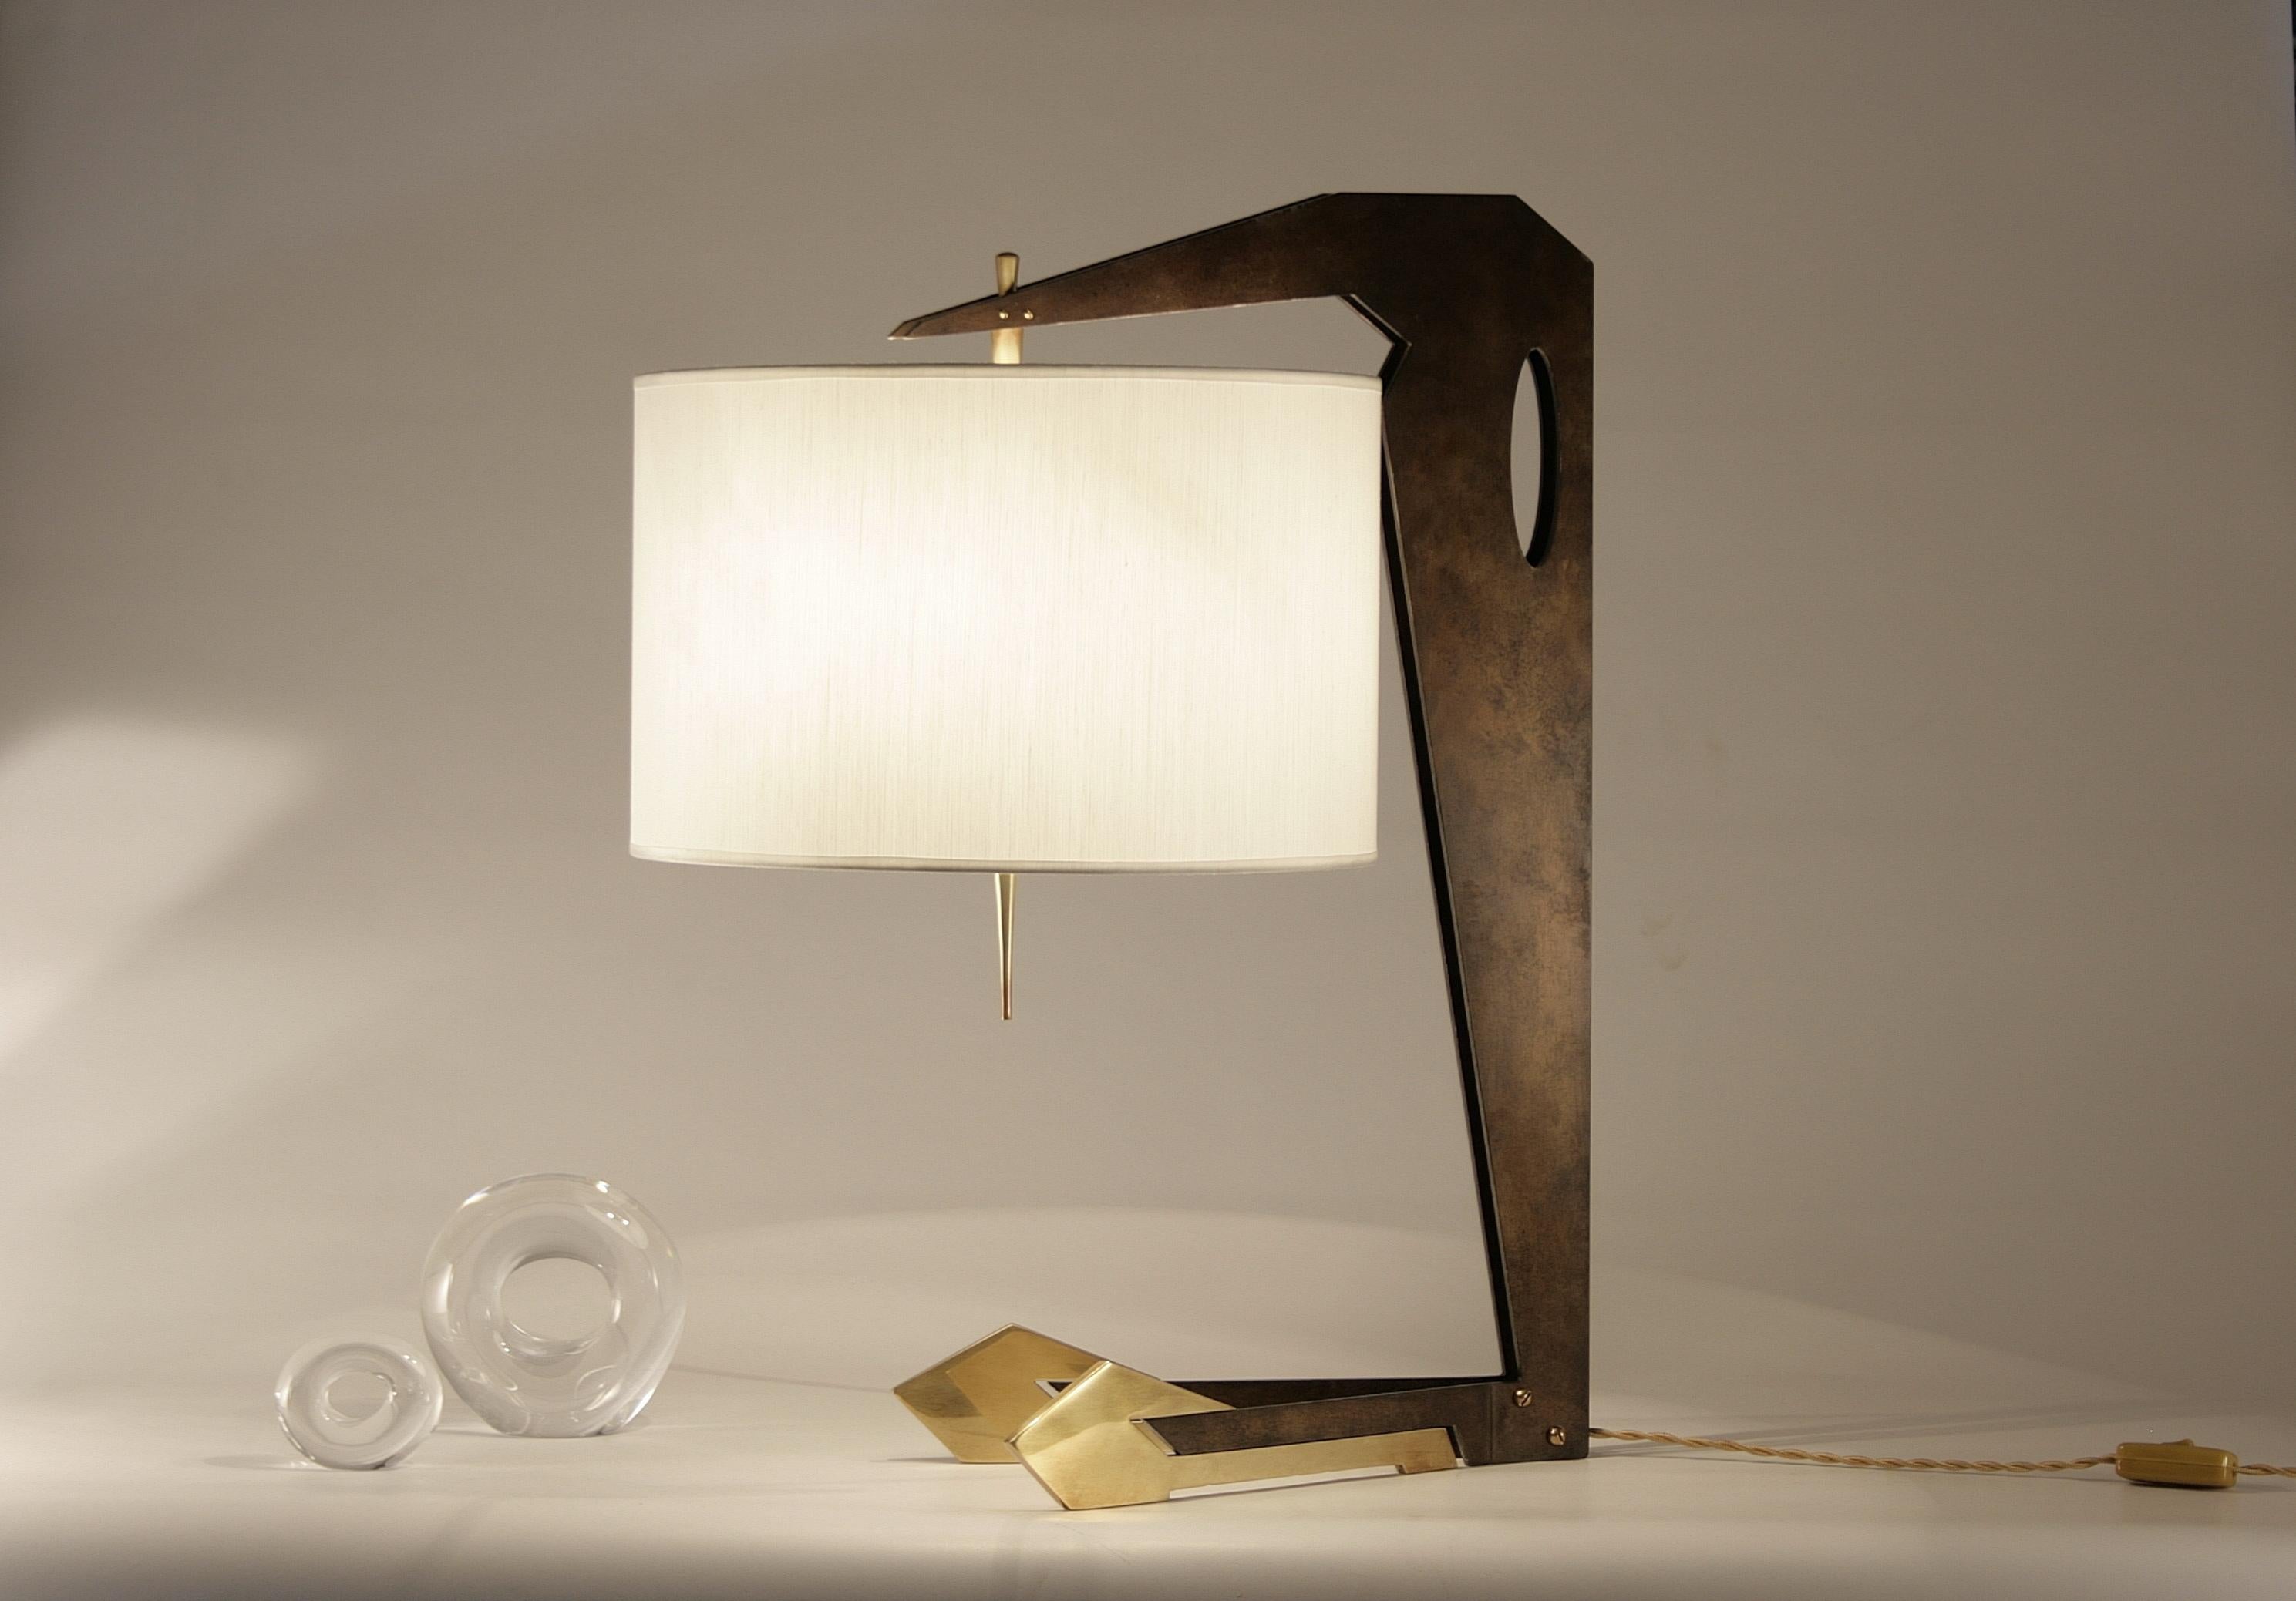 Lamp with metal structure composed of natural waxed iron and slightly burnished brass. Circular lampshade in ivory colored shantung; brass details.